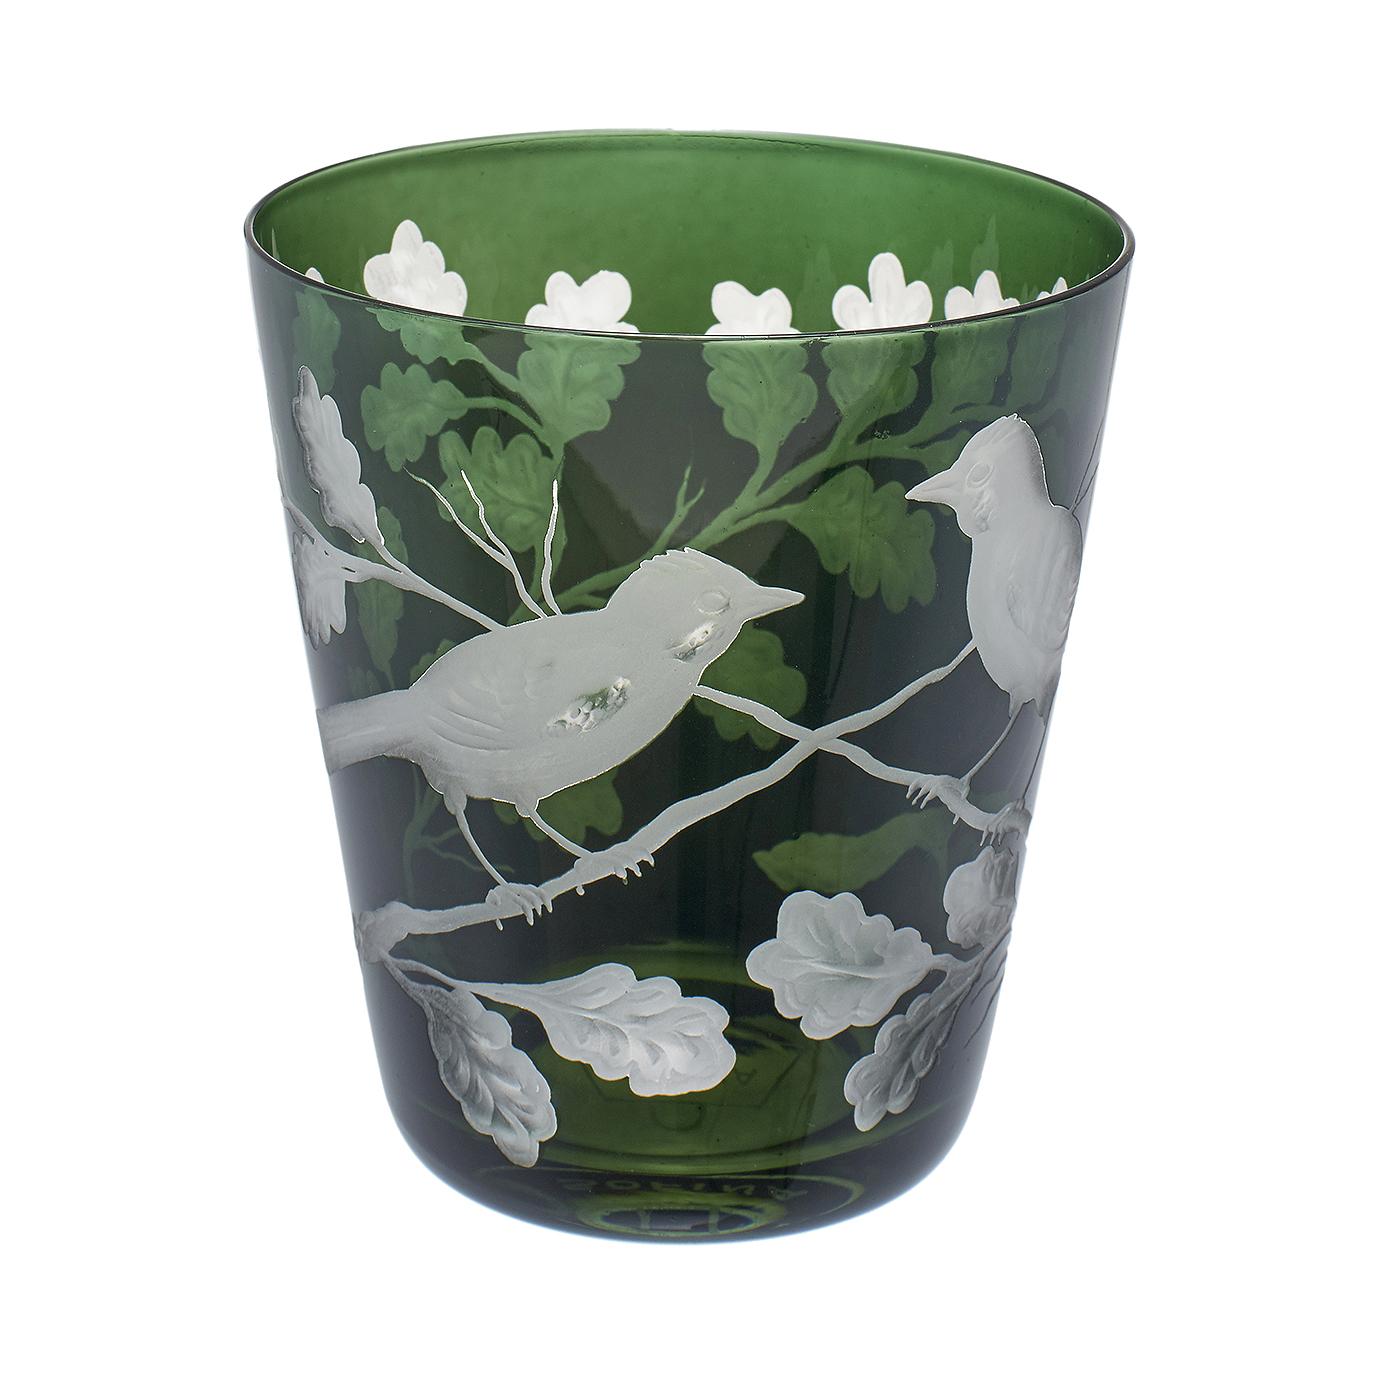 Set of six hand blown tumbler in green crystal with a hand-edged country style decor. The decor shows a hand-engraved decor with birds and oak leaves all-over the glass. Handmade in Bavaria/Germany. Can be ordered also in amber. Not for dishwashing